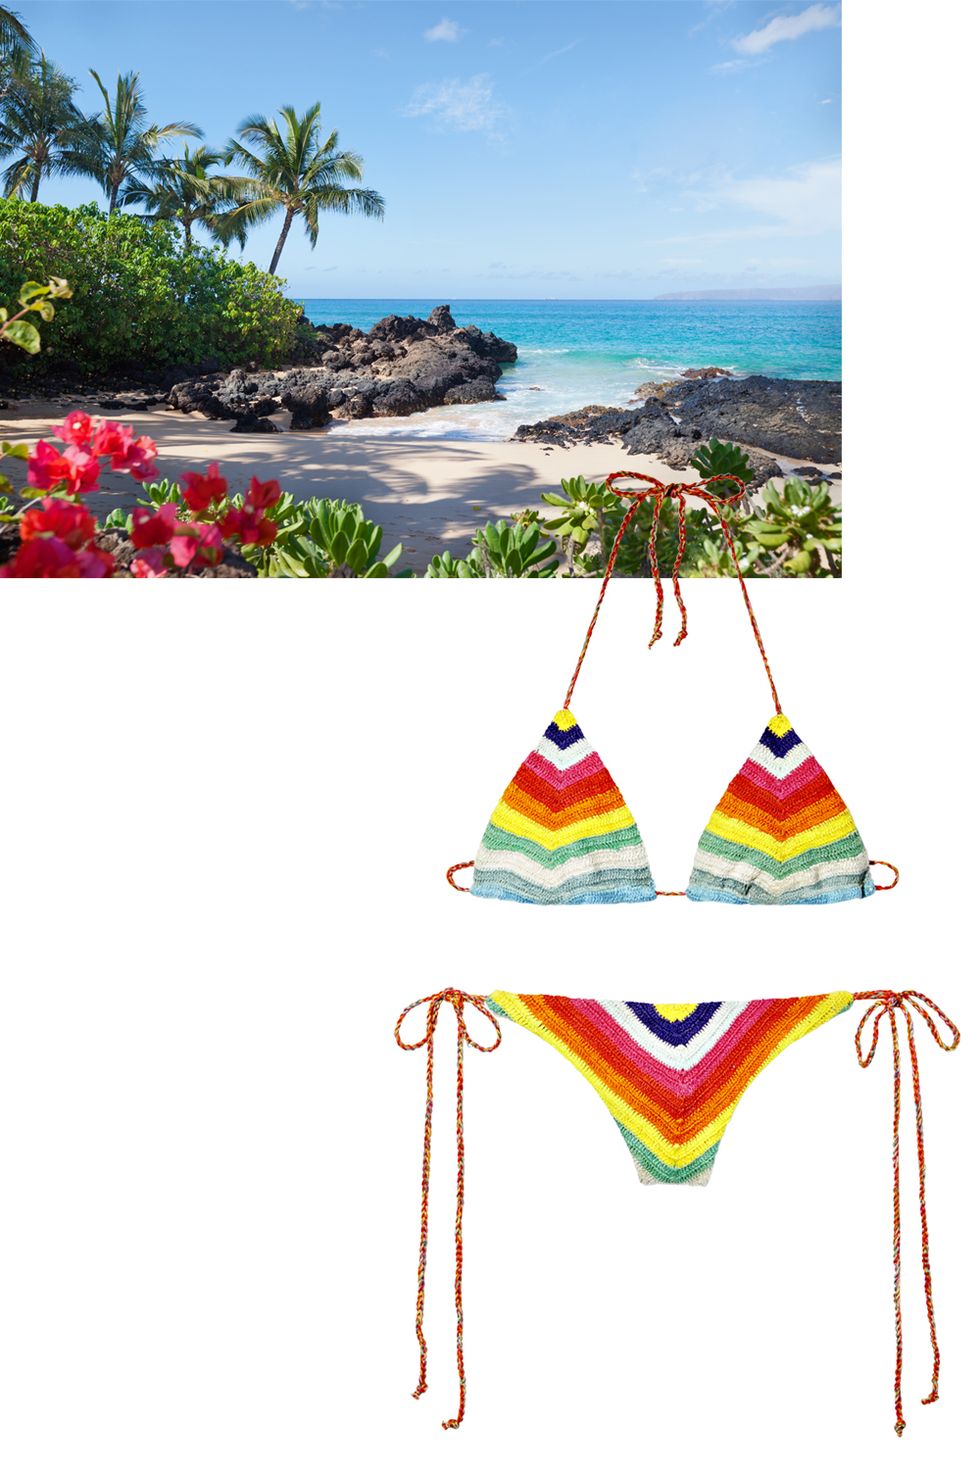 <p><strong>Ideal vacation: </strong>Maui, by car or by helicopter.</p><p><strong>Workout routine: </strong>A combination of stretching, strength-training, and cardio.</p><p><strong><em>Mara Hoffman </em></strong><em> bikini top, $90, and bottom, $170,  <a href="http://www.marahoffman.com/">marahoffman.com</a></em><span class="redactor-invisible-space"><em>; Maui</em></span><br></p>